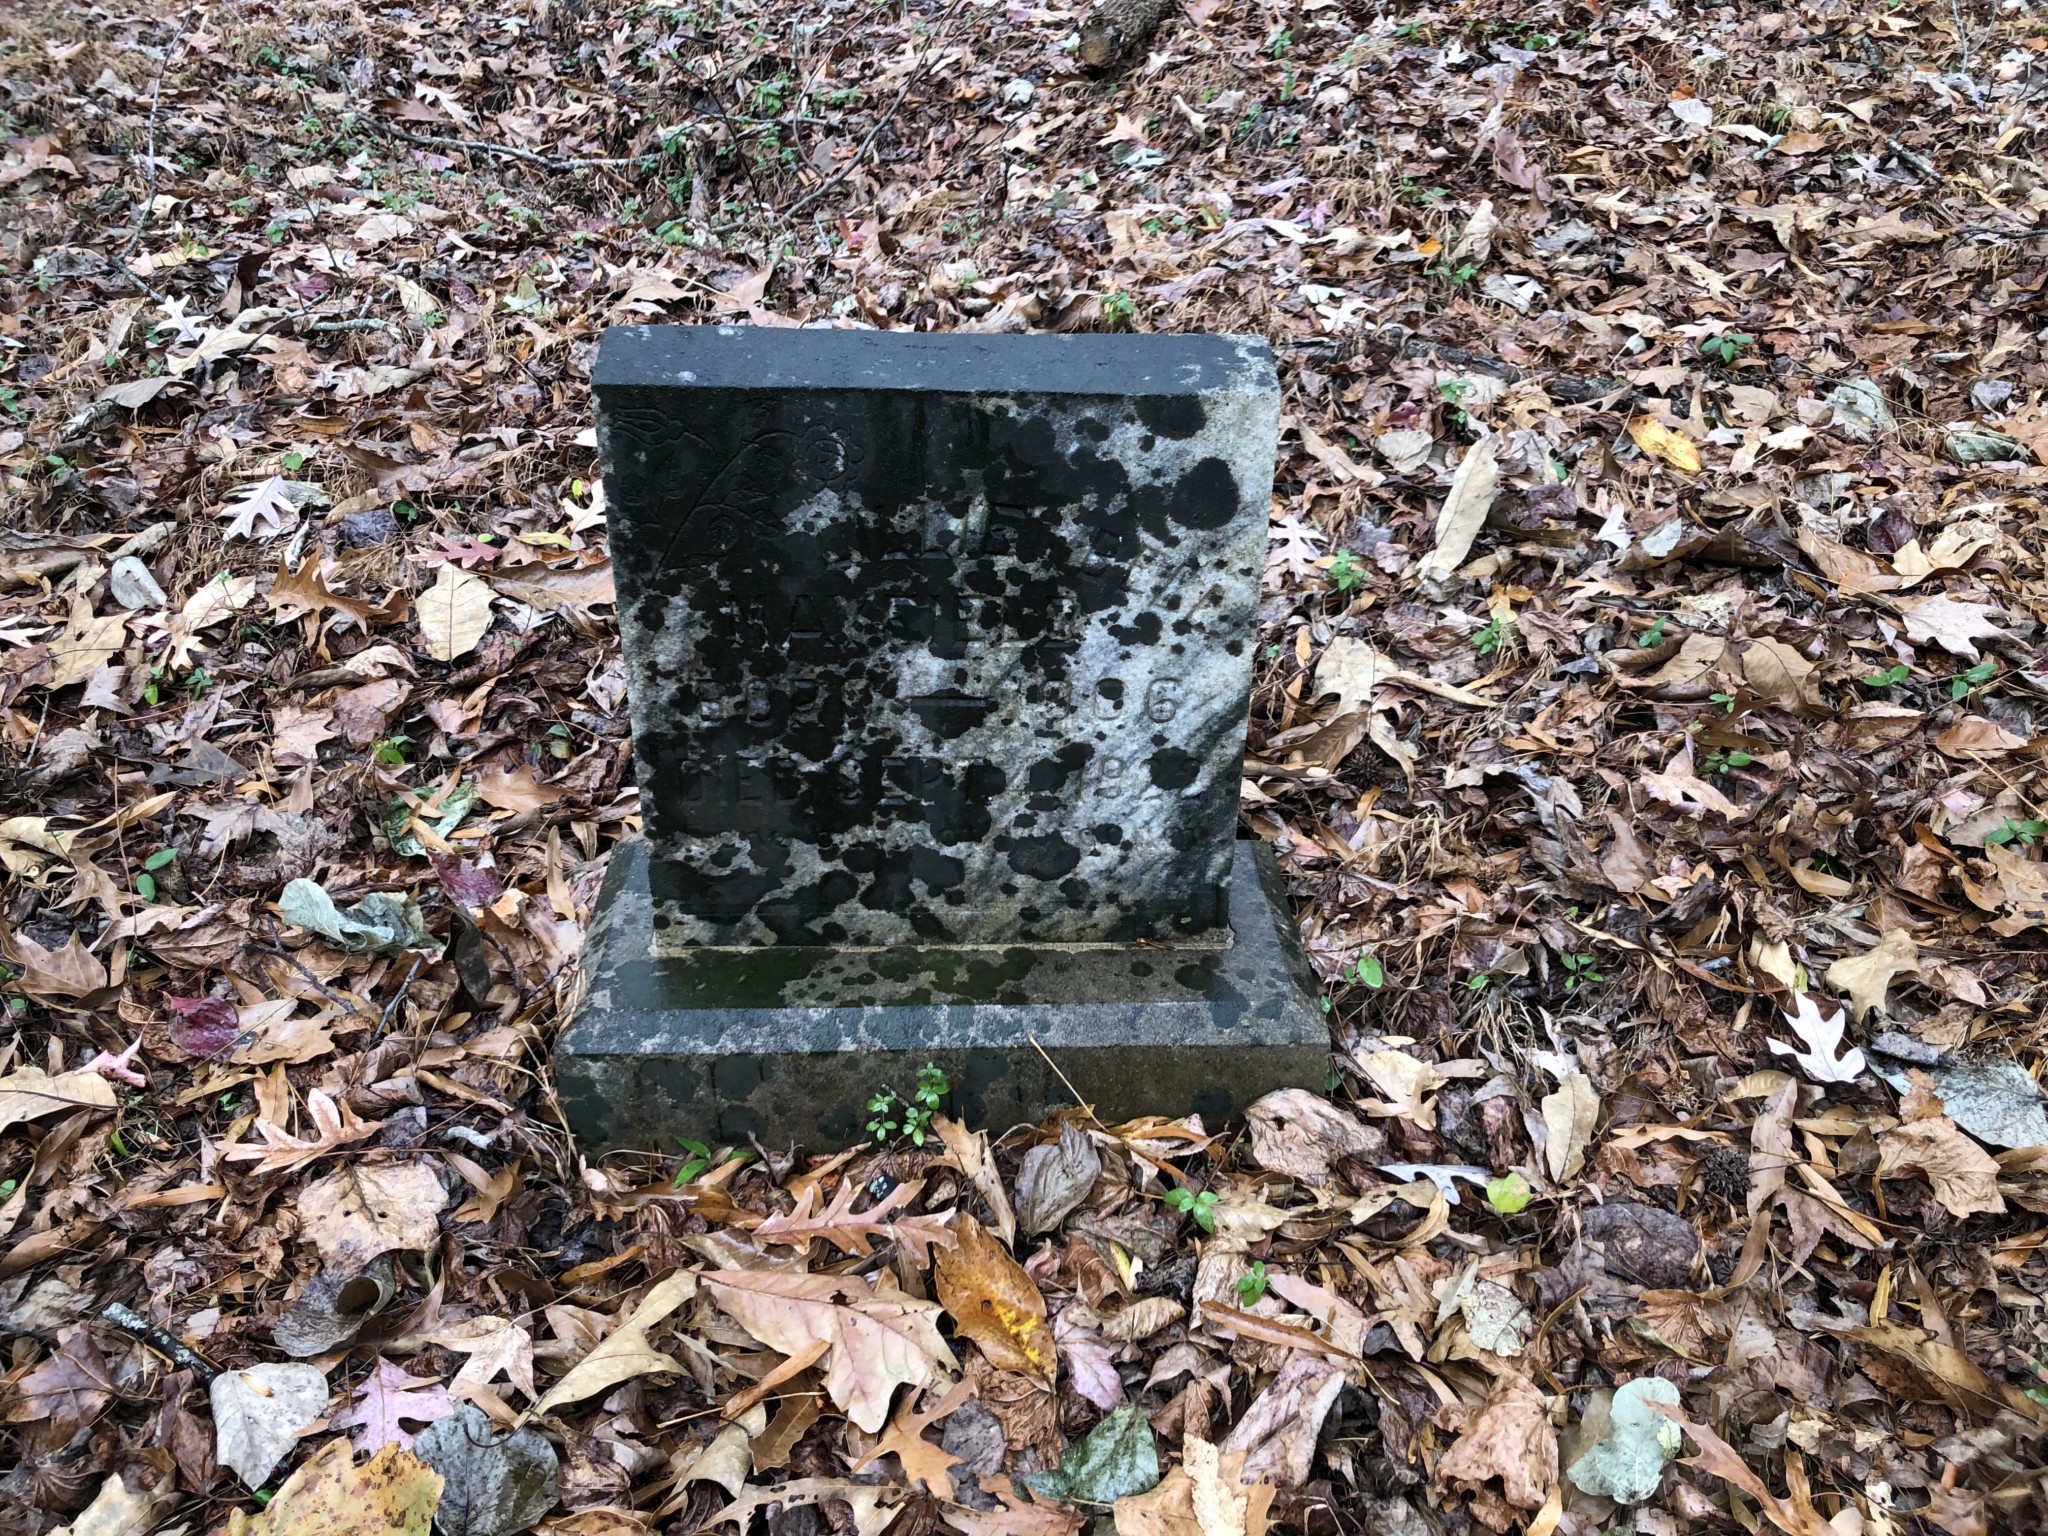 One of the upright tombstones associated with the defunct Crossroads Baptist Church. Courtesy of R&R.com 2022